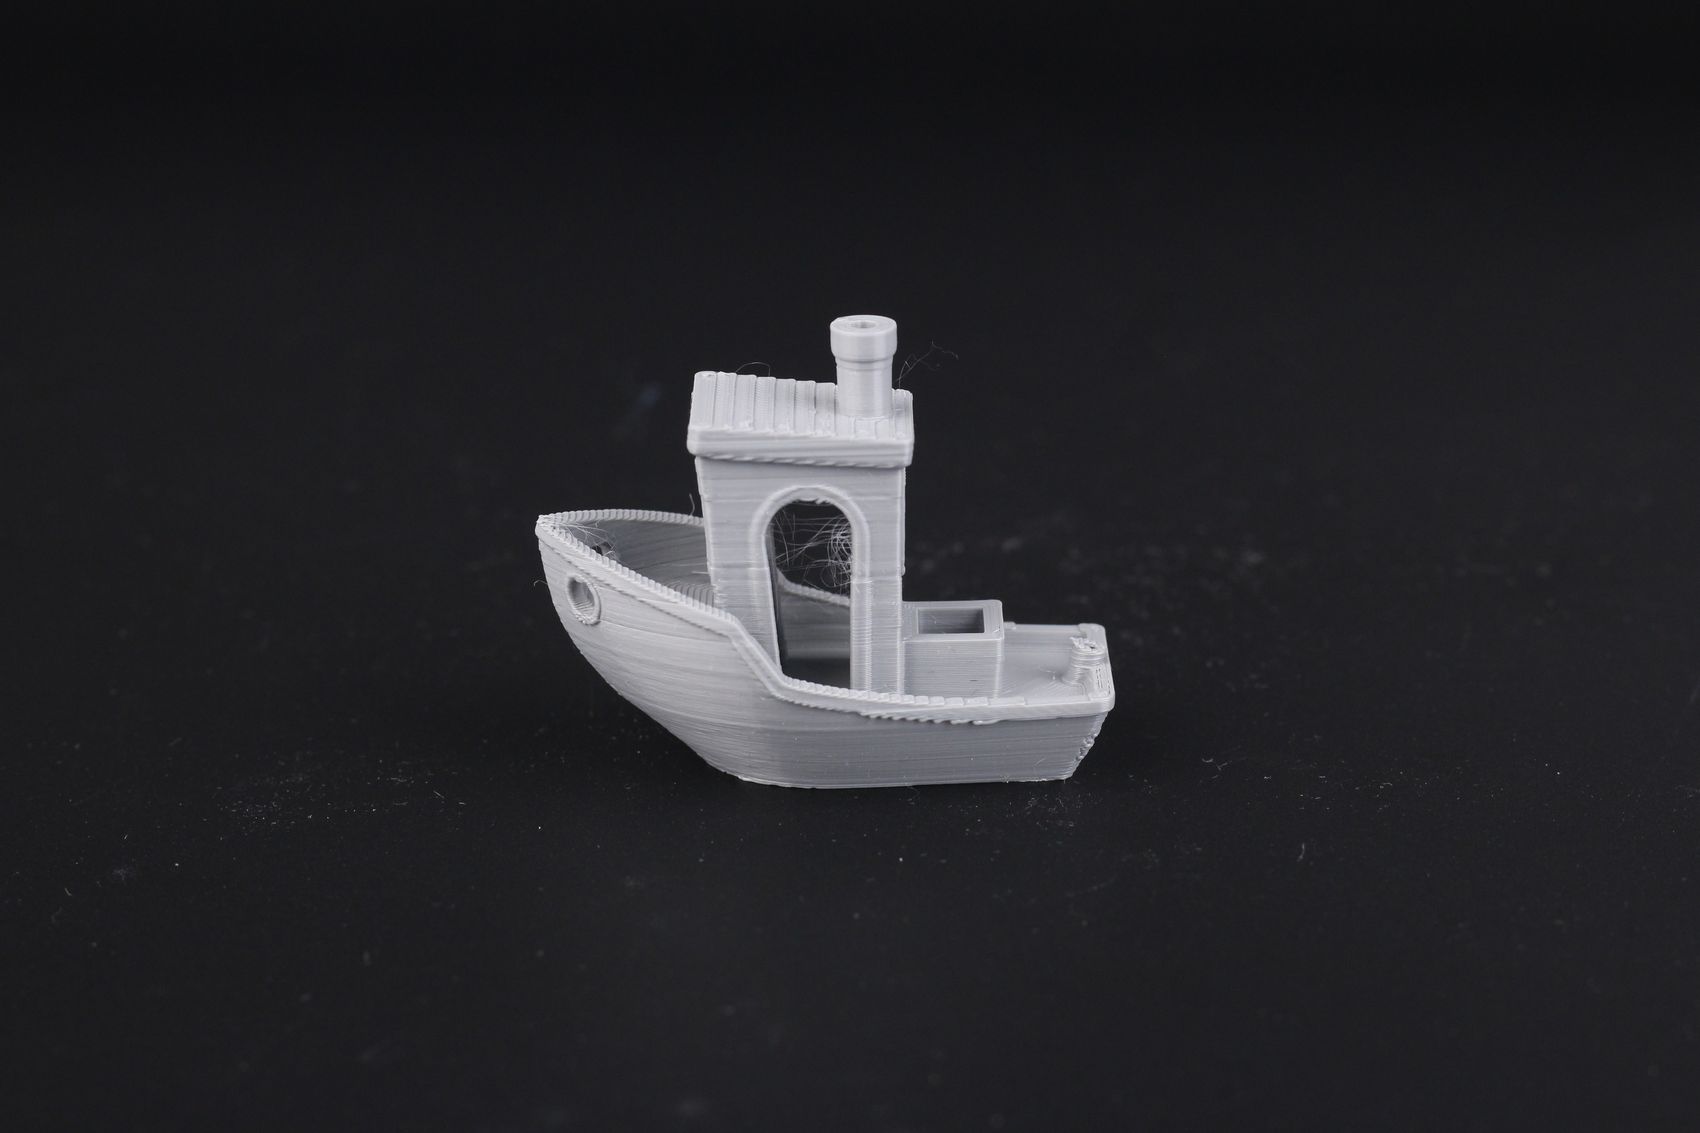 3D Benchy printed on the Anycubic Kobra Plus4 | Anycubic Kobra Plus Review: A Larger Vyper